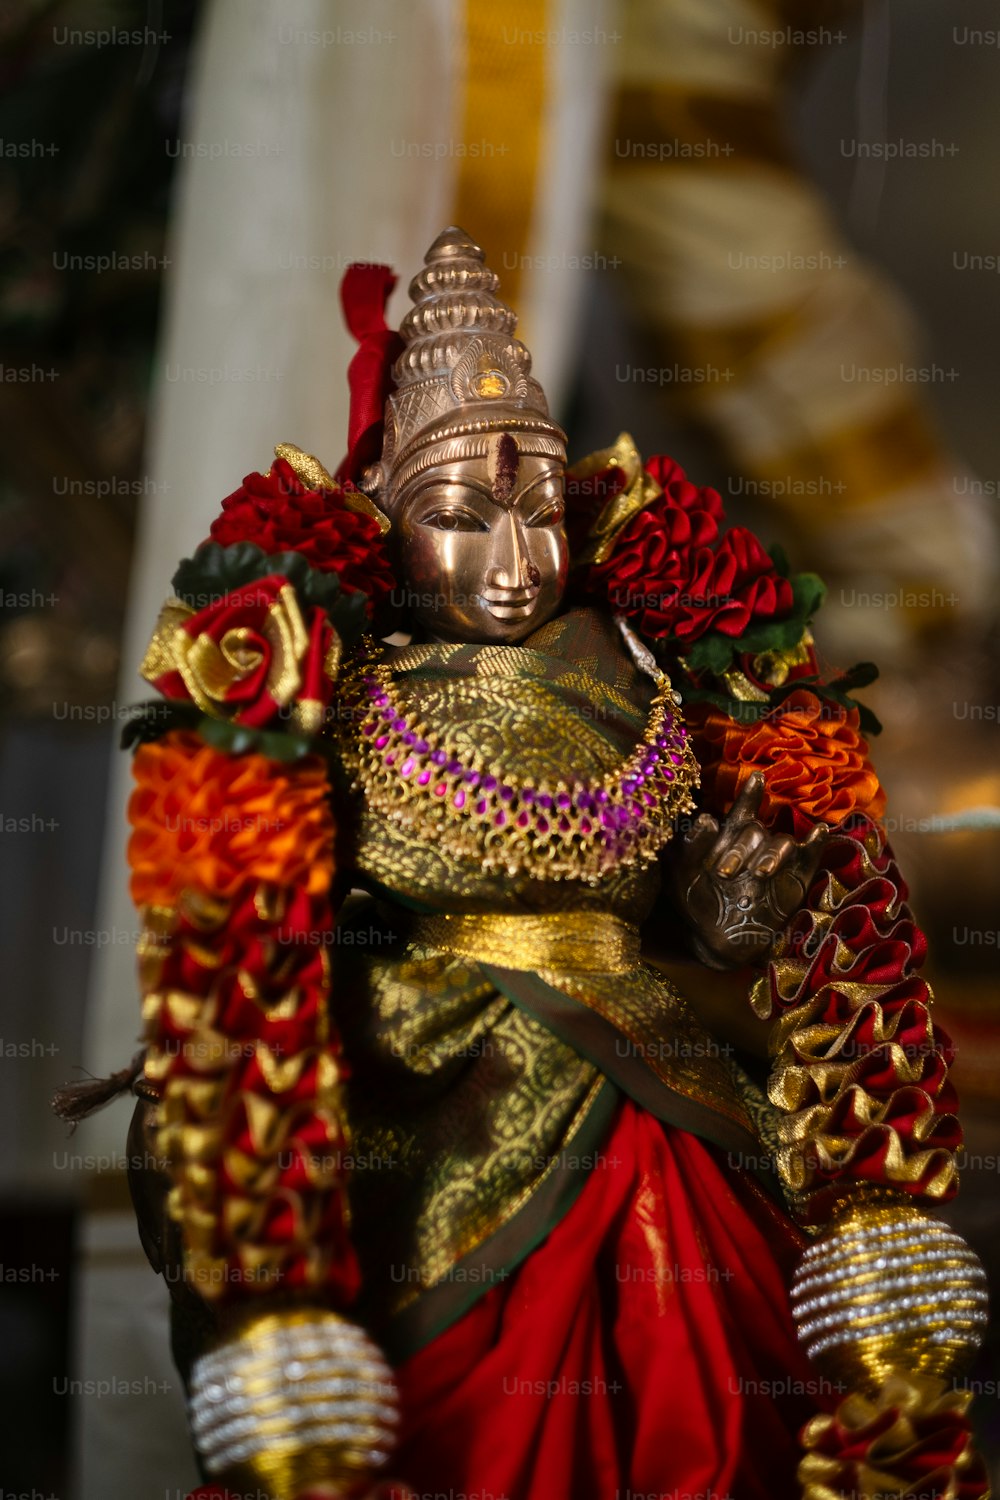 a statue of a person in a red and gold outfit